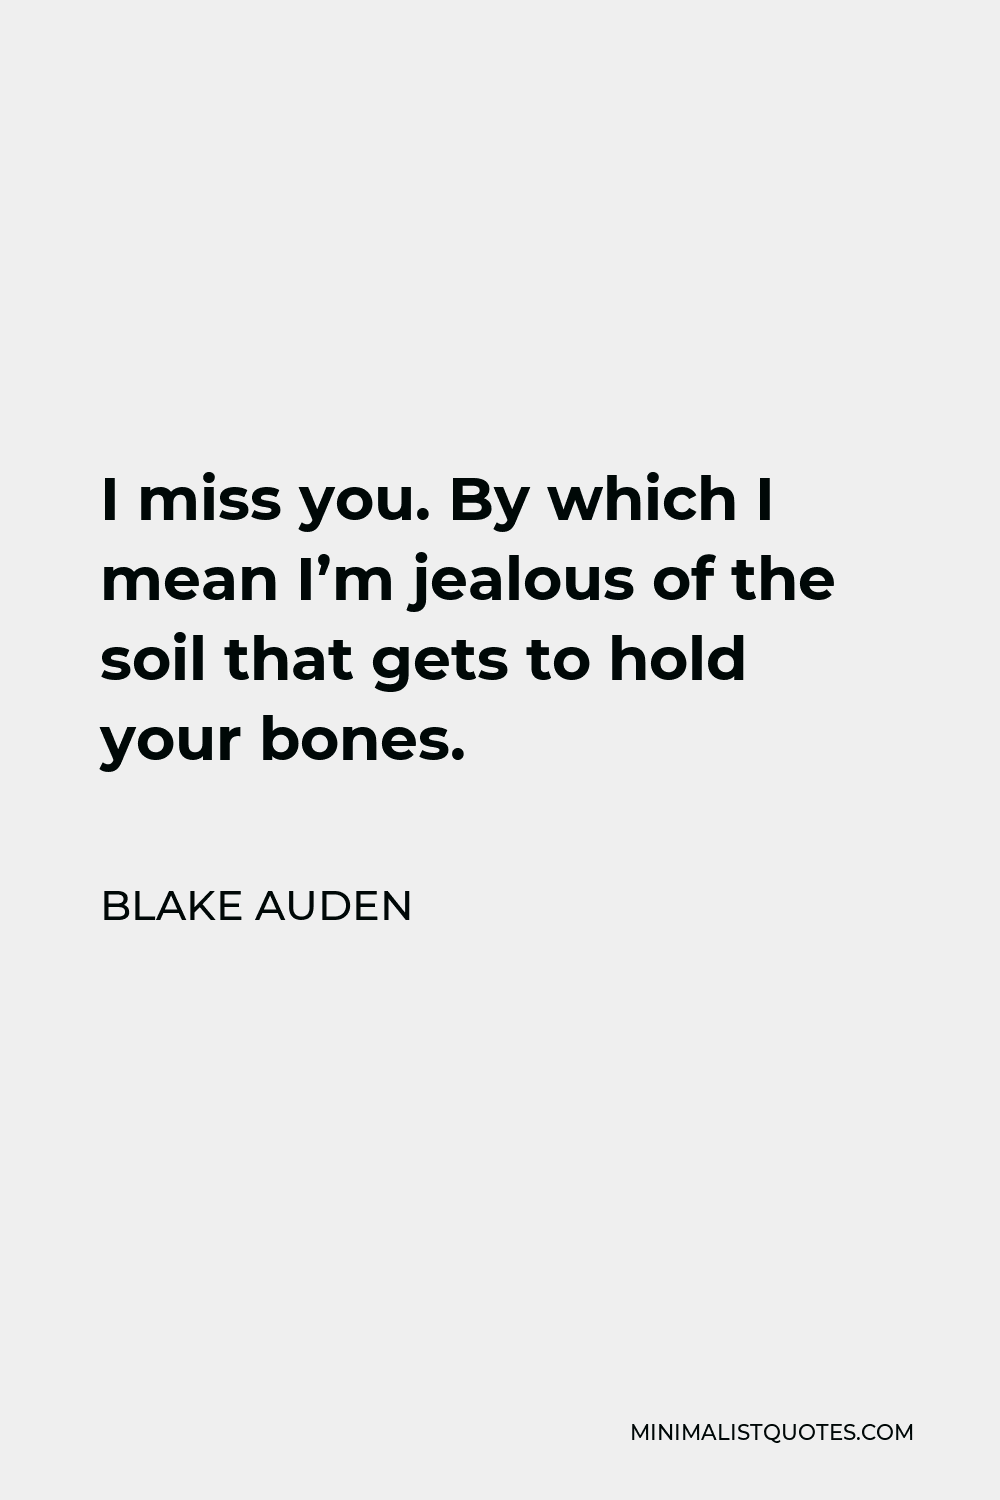 Blake Auden Quote - I miss you. By which I mean I’m jealous of the soil that gets to hold your bones.